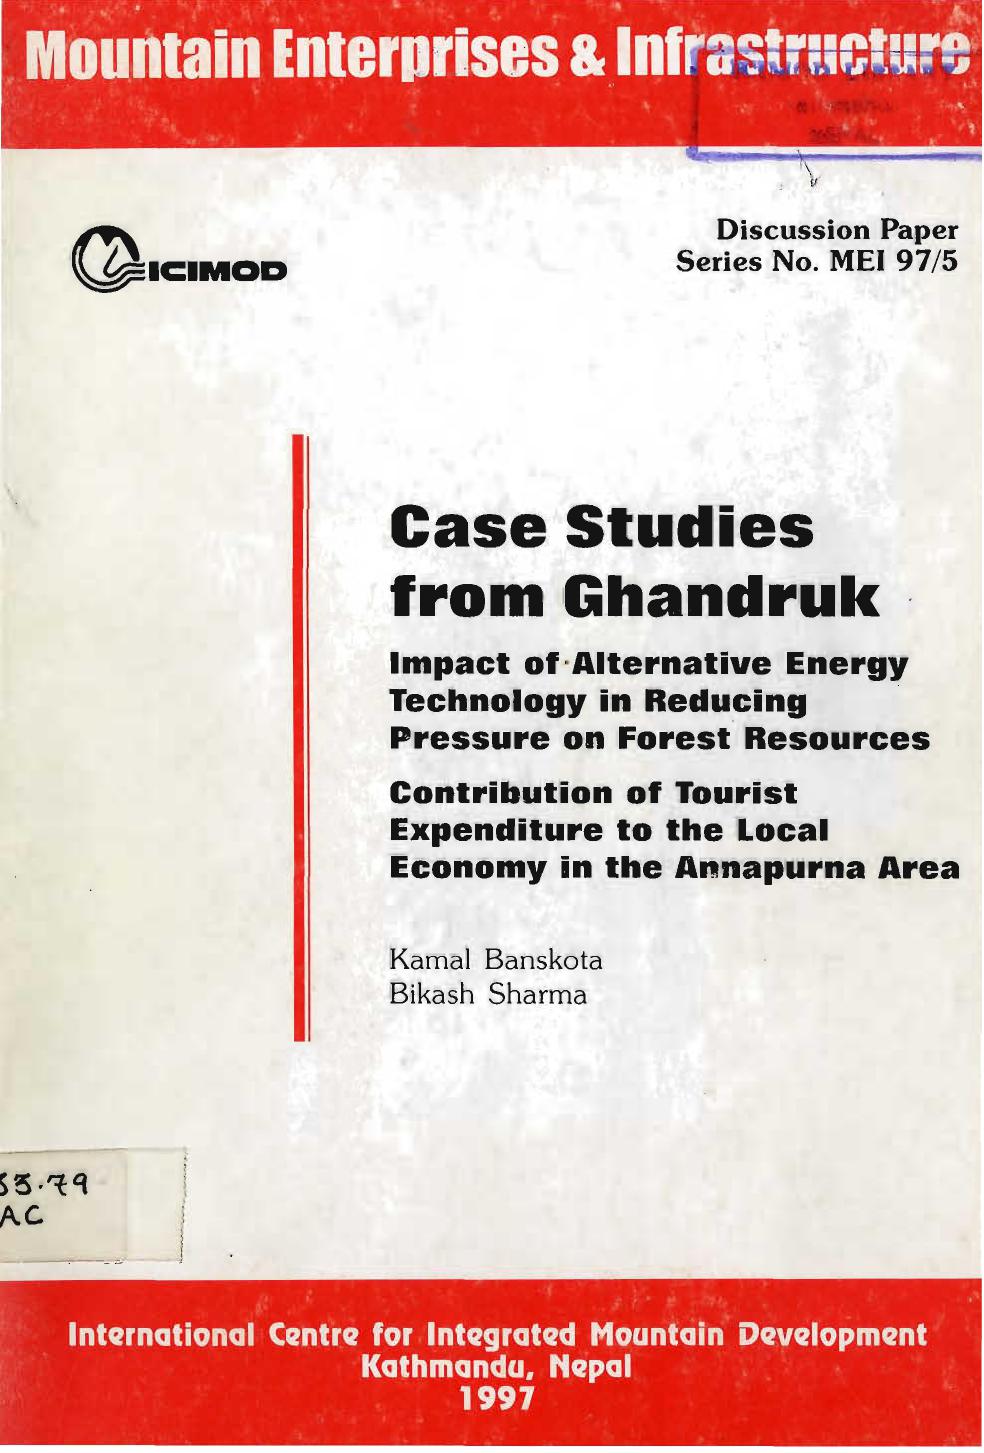 Case Studies from Ghandruk: Impact of Alternative Energy Technology in Reducing Pressure on Forest Resources; Contribution of Tourist Expenditure to the Local Economy in the Annapurna Area; Mountain Enterprises and Infrastructure (MEI) Discussion paper 97/5